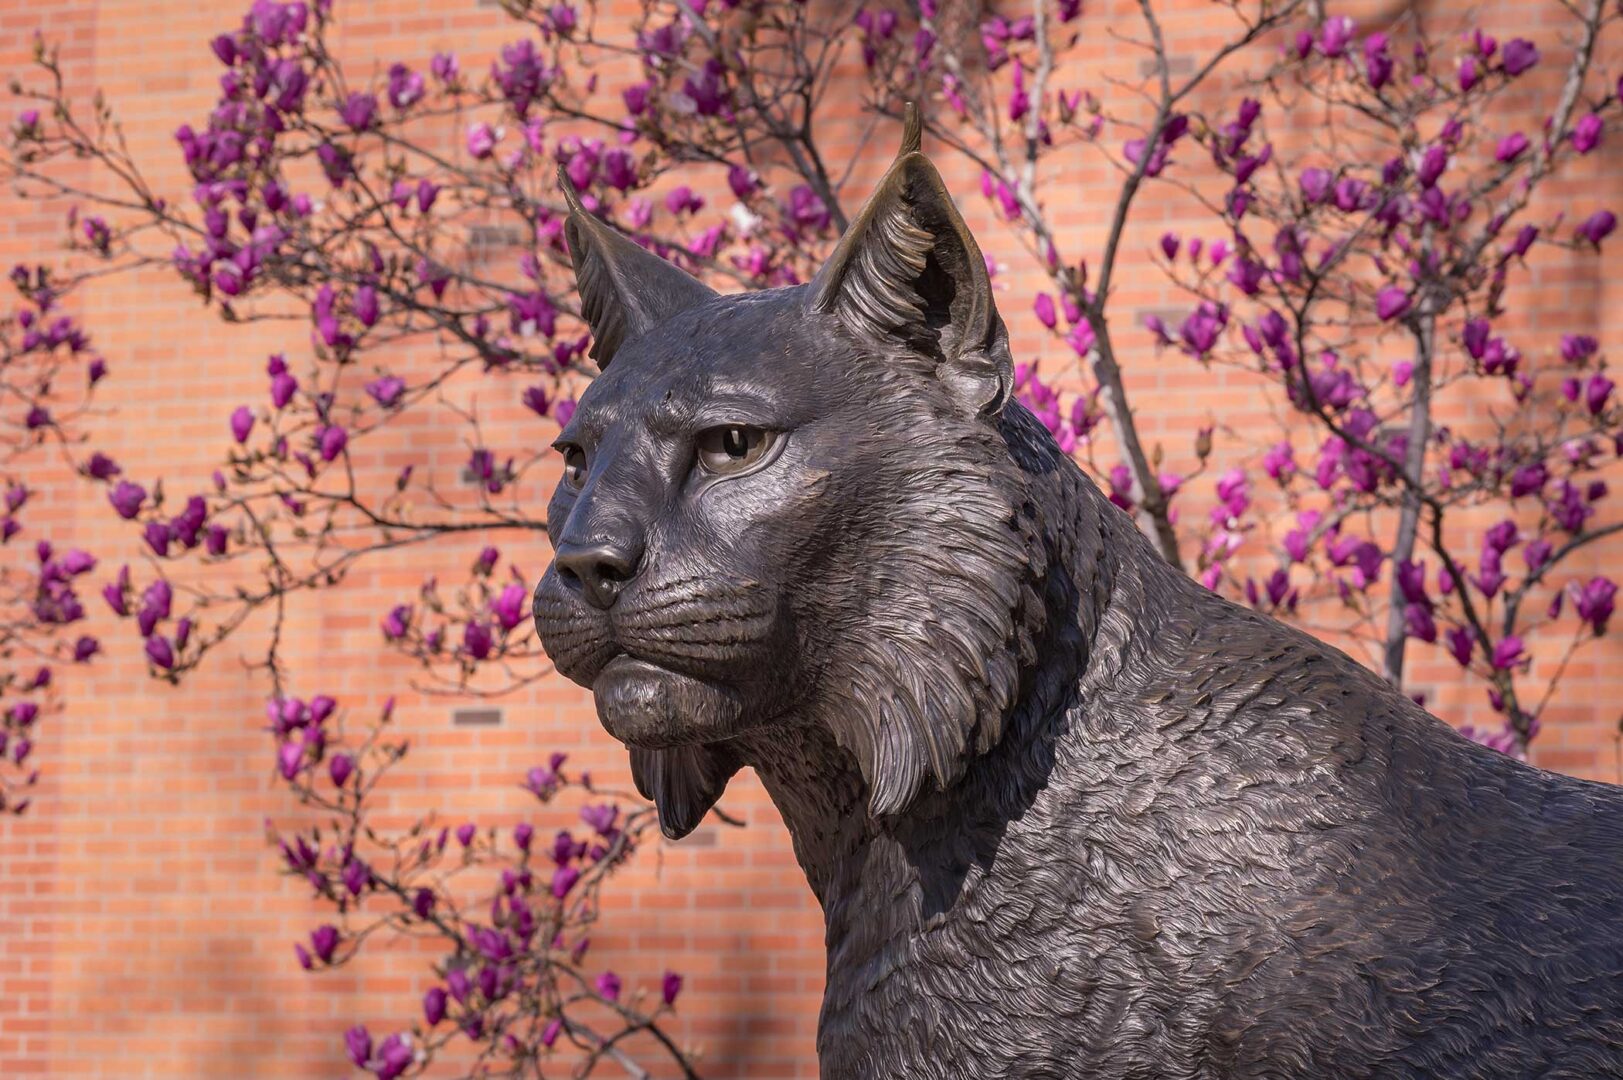 Magnolia blossoms open behind the Wildcat Statue which is in the foreground.